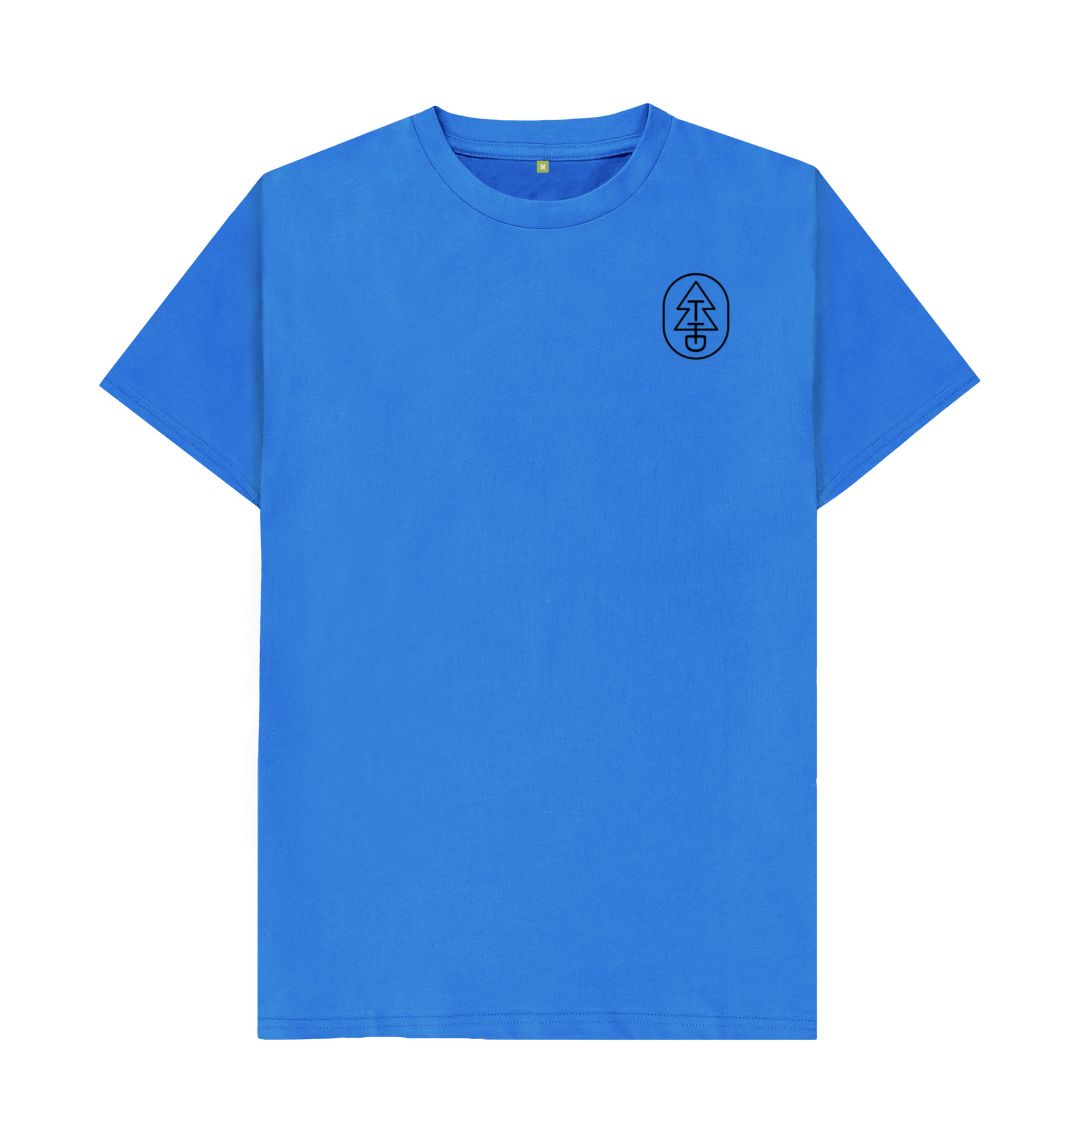 Bright Blue Tree Tee - Channel Sunset